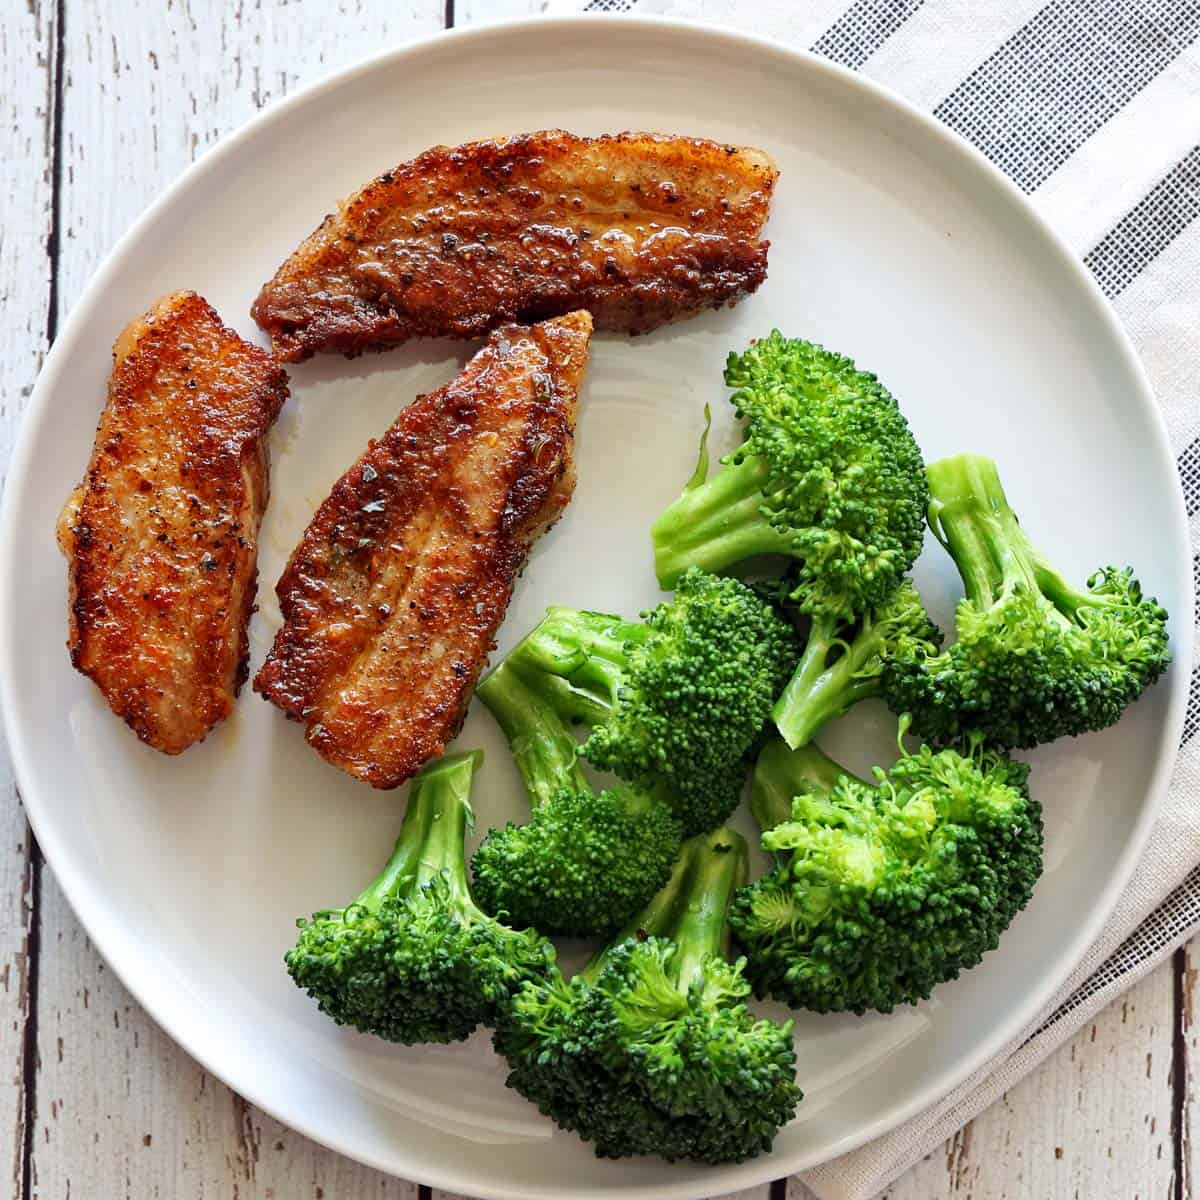 Pork belly is served with broccoli for dinner.